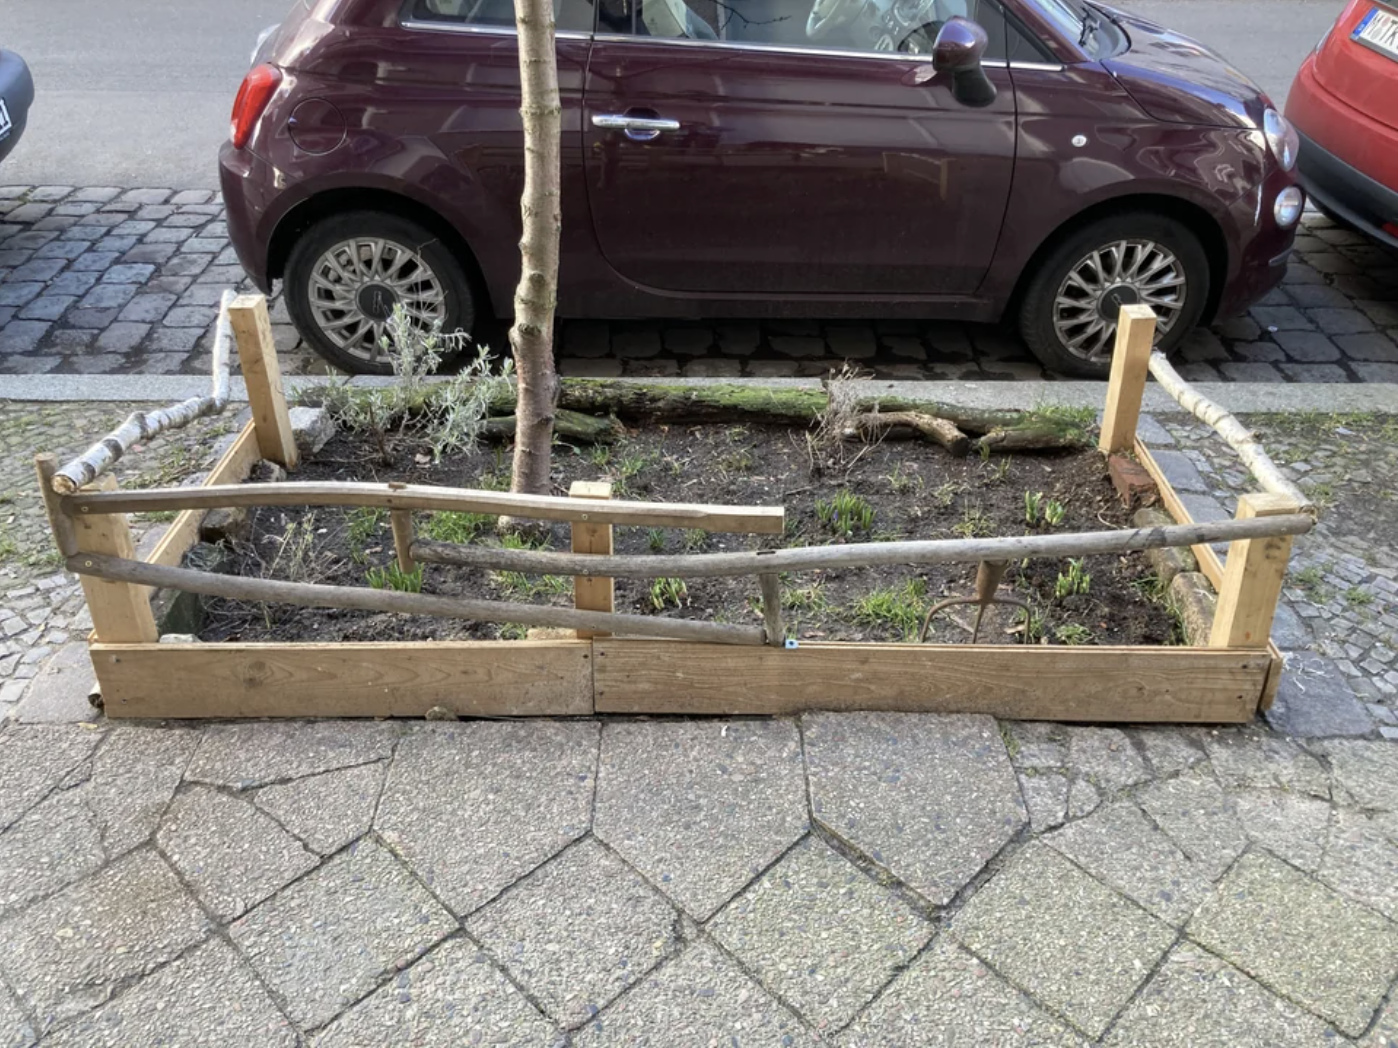 Posted by u/snoozeparty on r/guerillagardening.